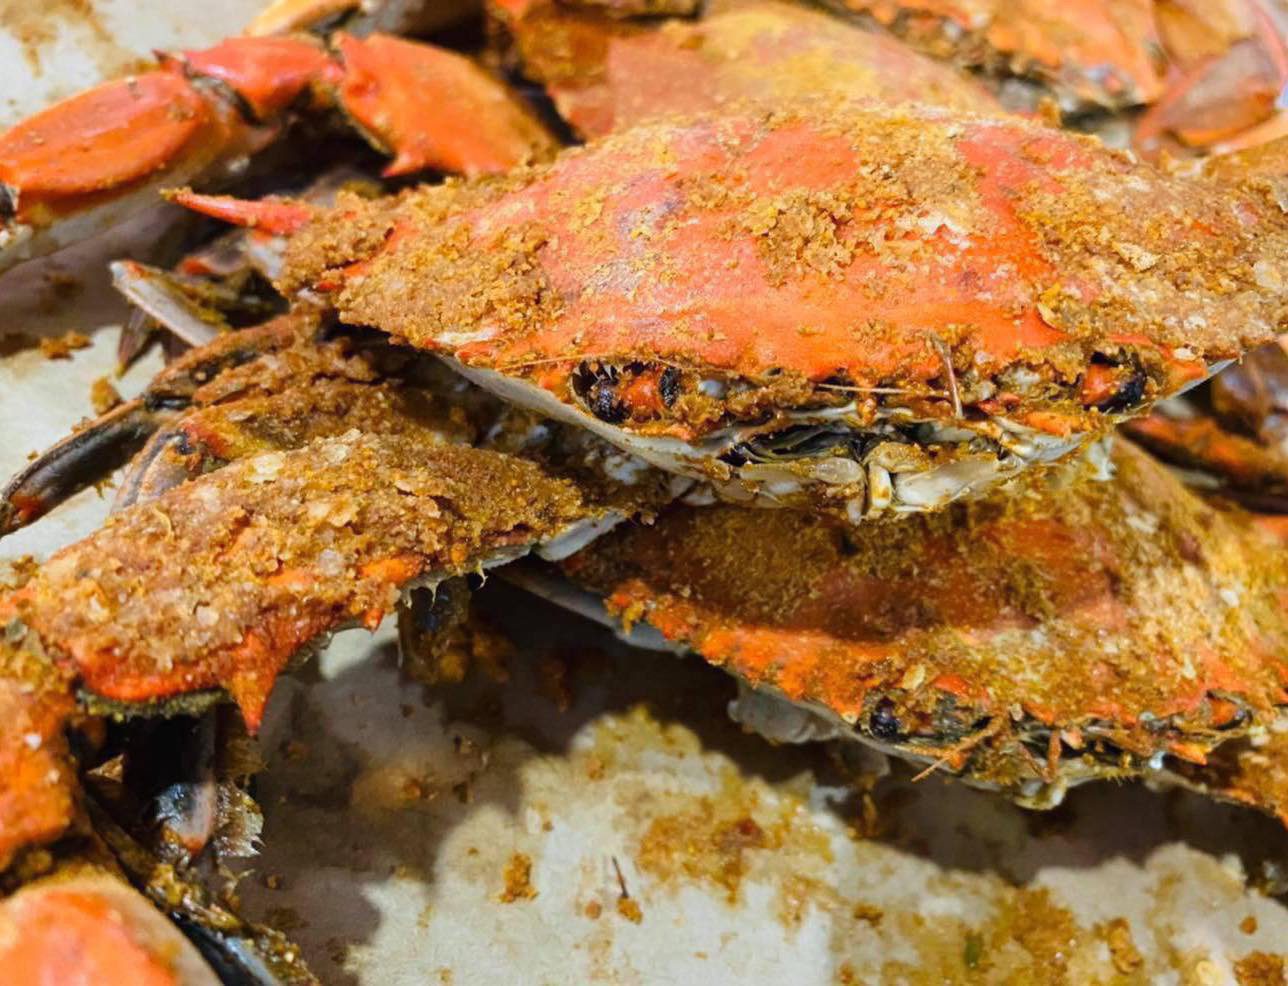 A Full Bushel Steamed Crabs on a Plate One